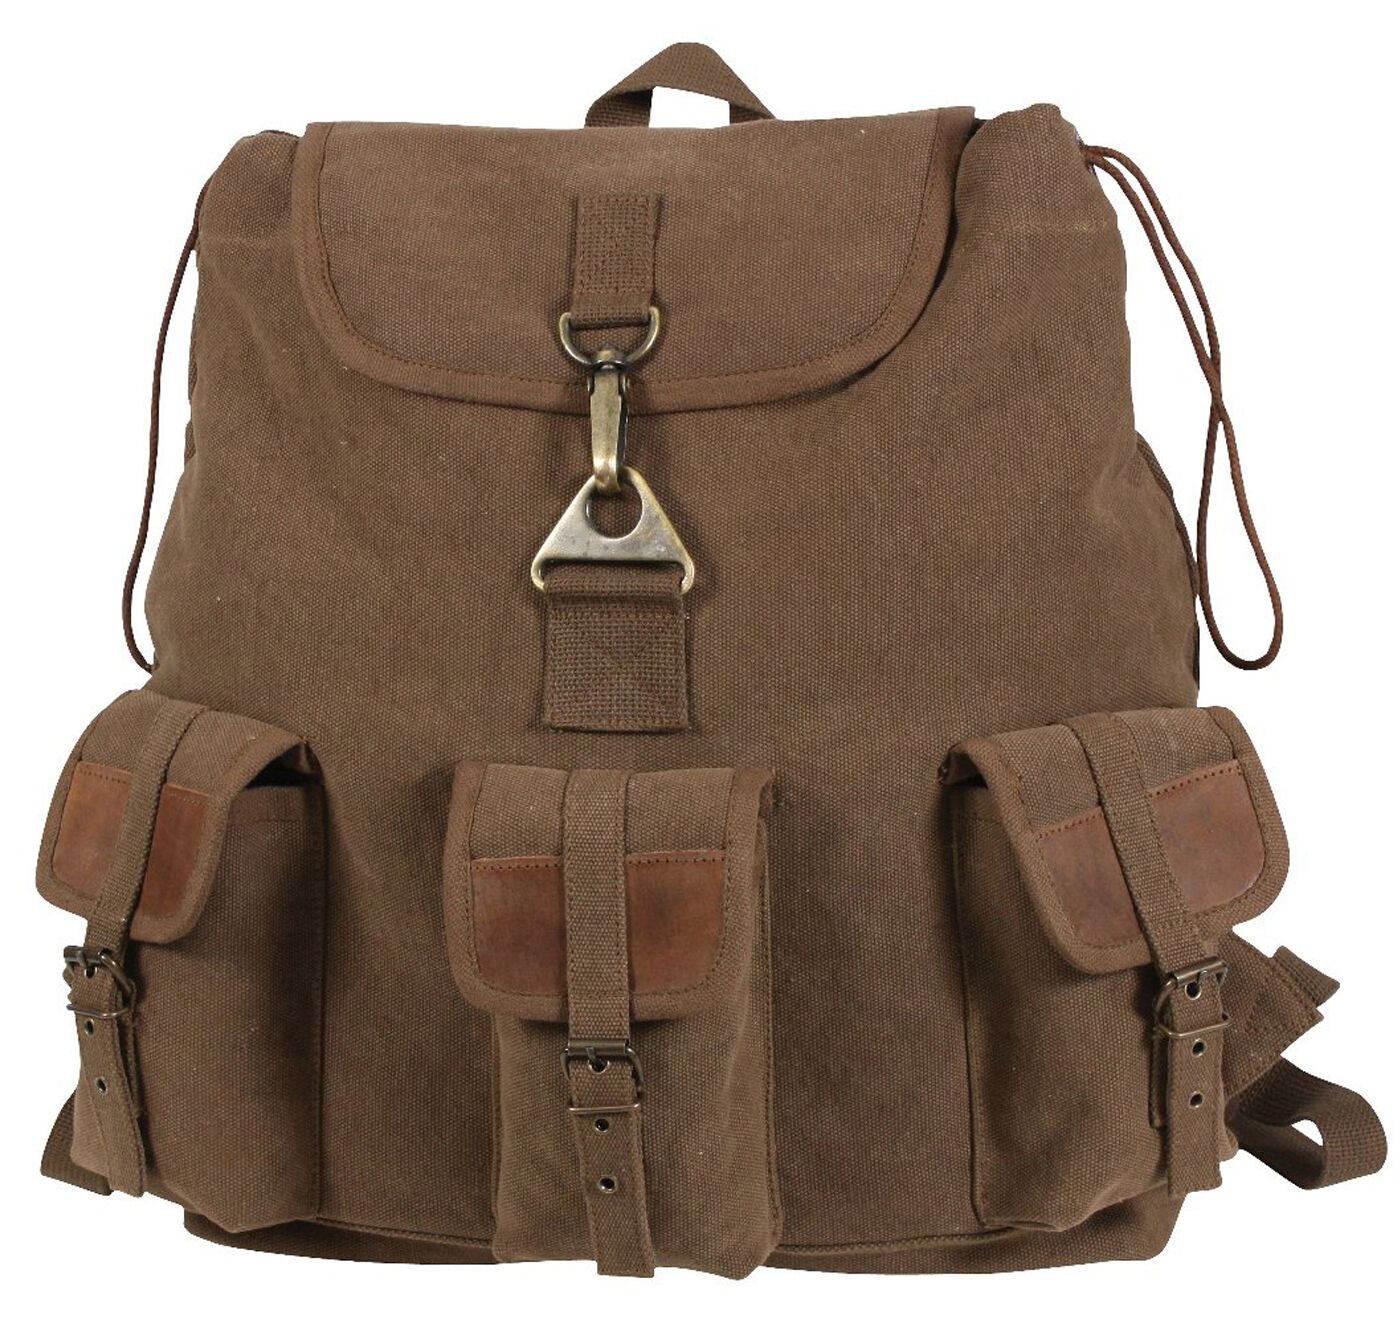 Rothco Vintage Canvas Wayfarer Backpack w/ Leather Accents